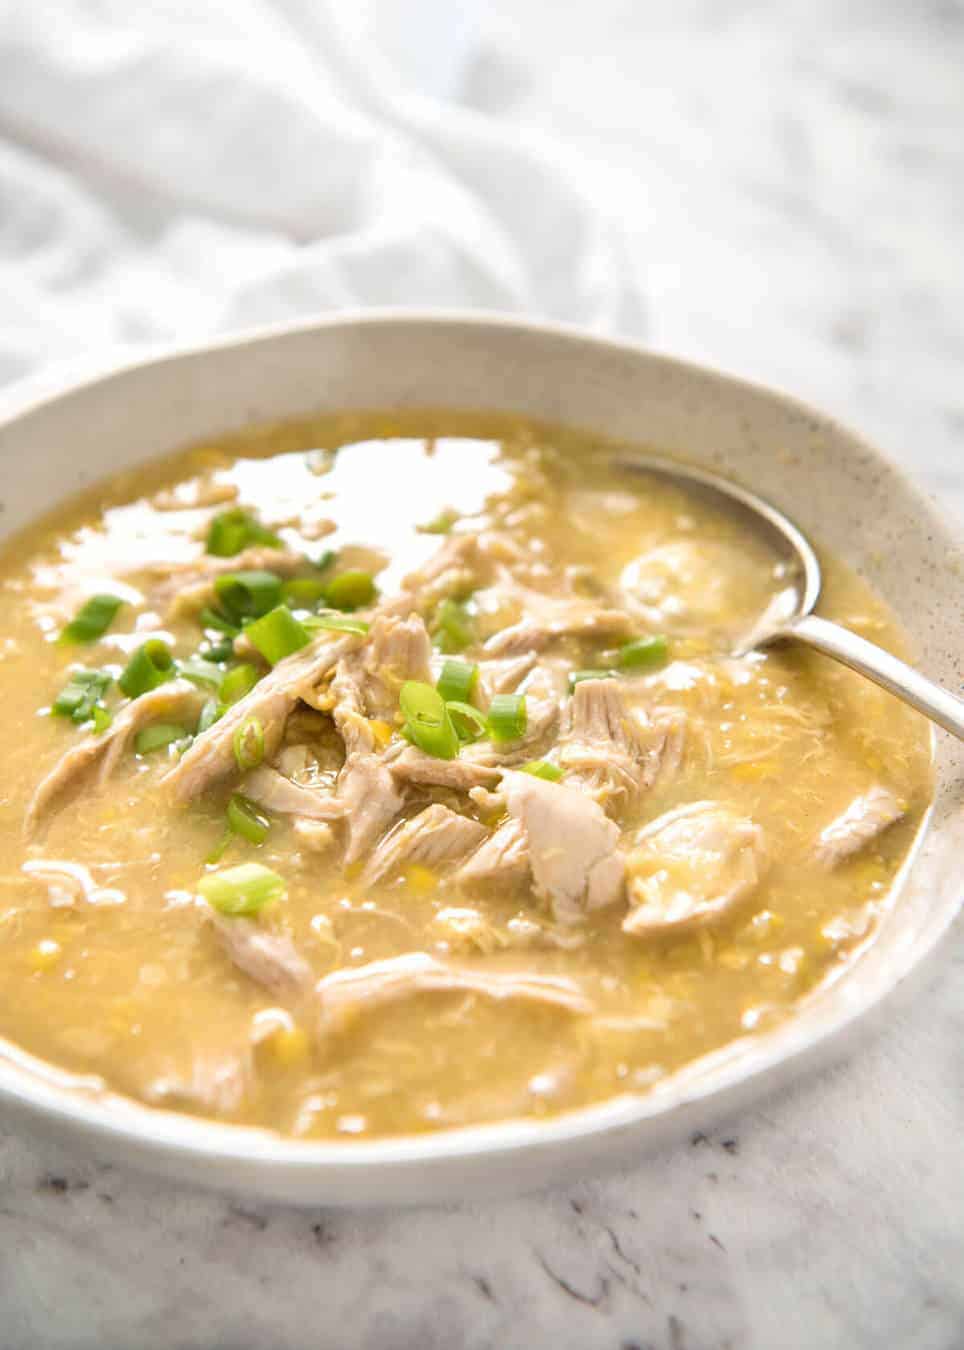 Chinese Chicken And Corn Soup Online, Save 42% | jlcatj.gob.mx